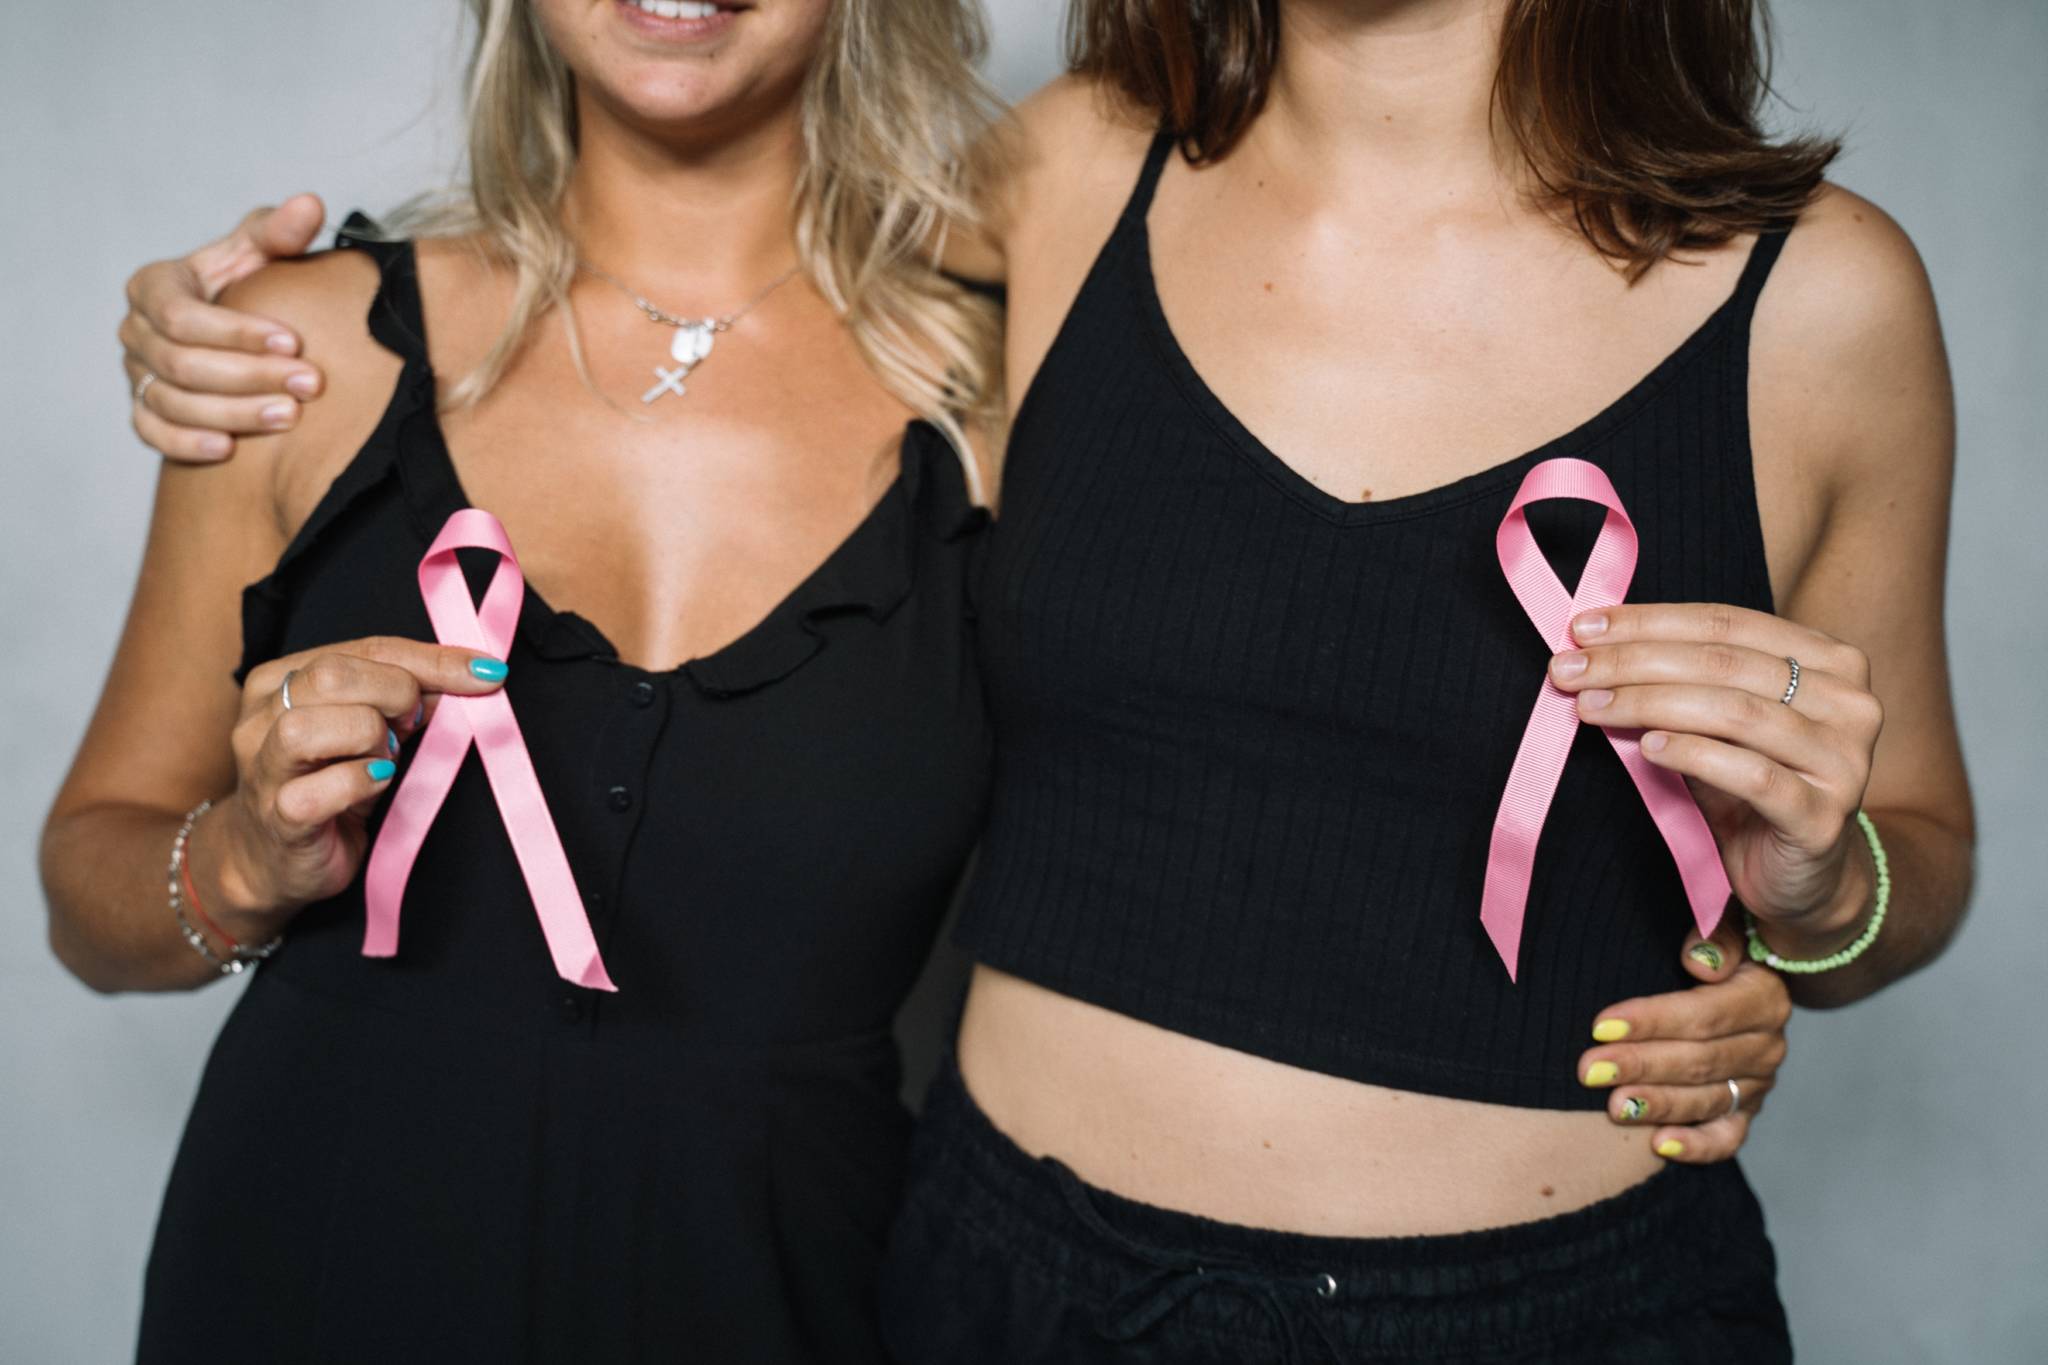 Blonde and brunette woman standing side-by-side wearing black T-shirts holding pink ribbons for breast cancer awareness